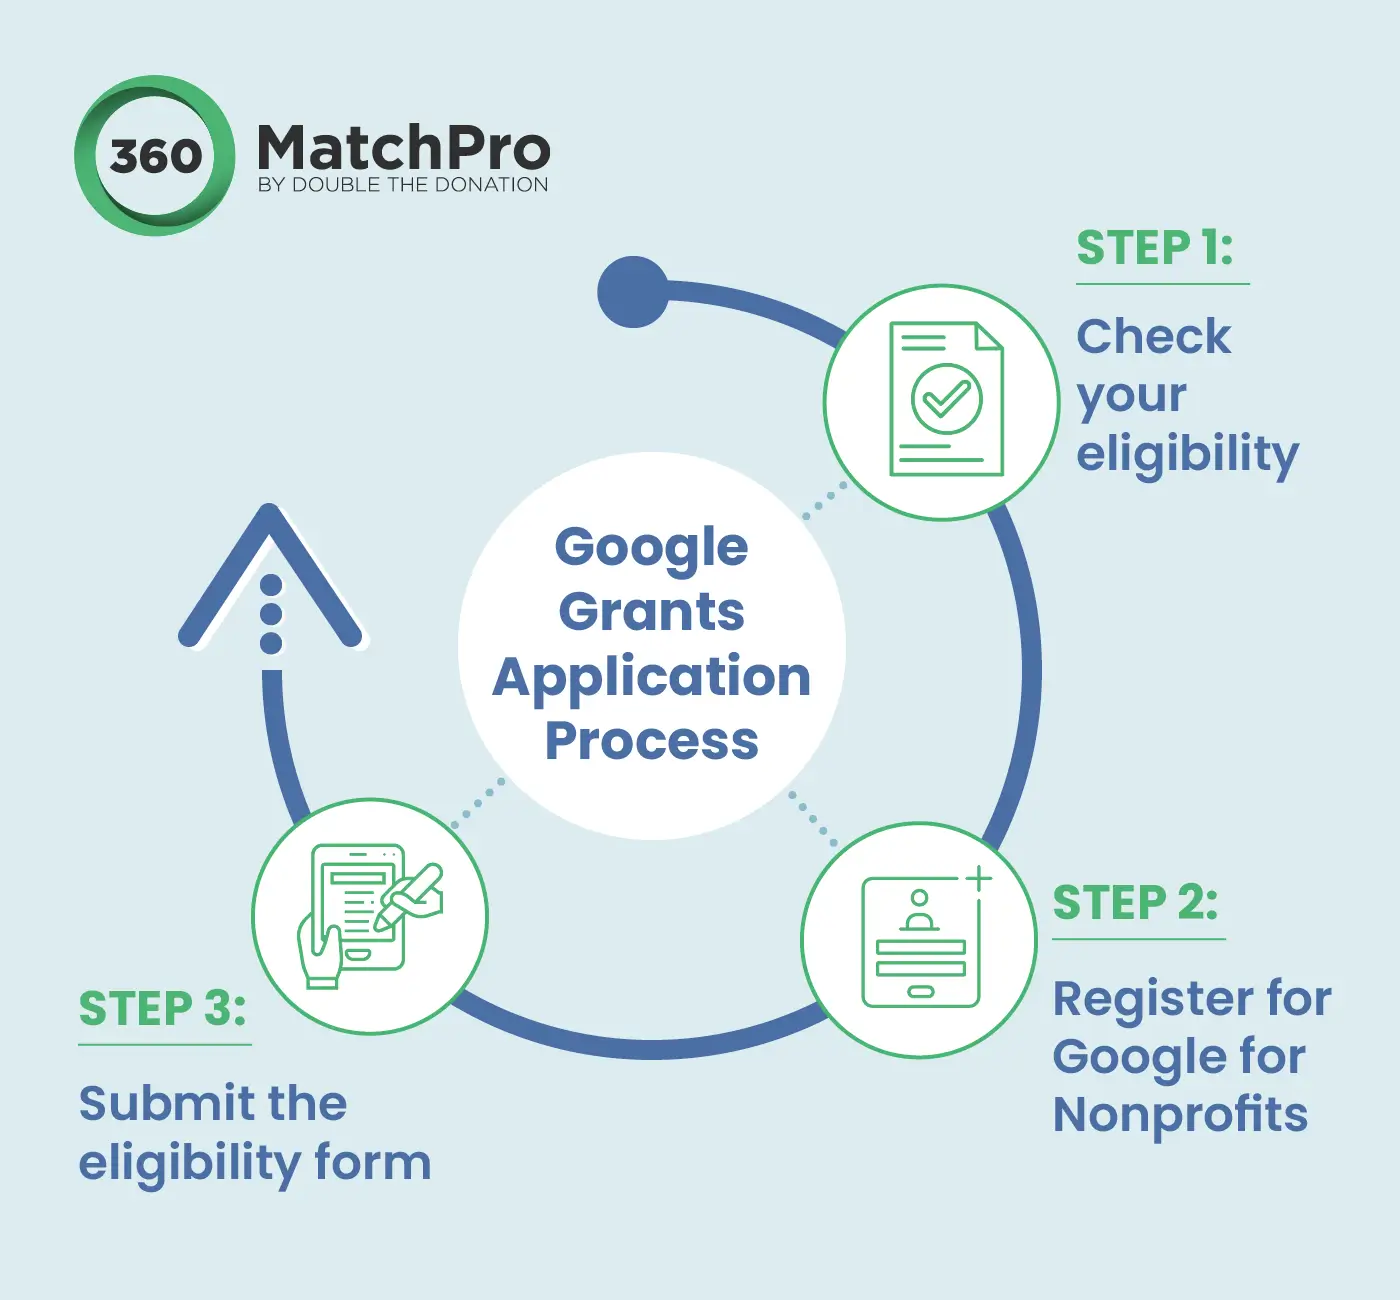 The steps nonprofits must take to apply after checking their Google Grant eligibility.